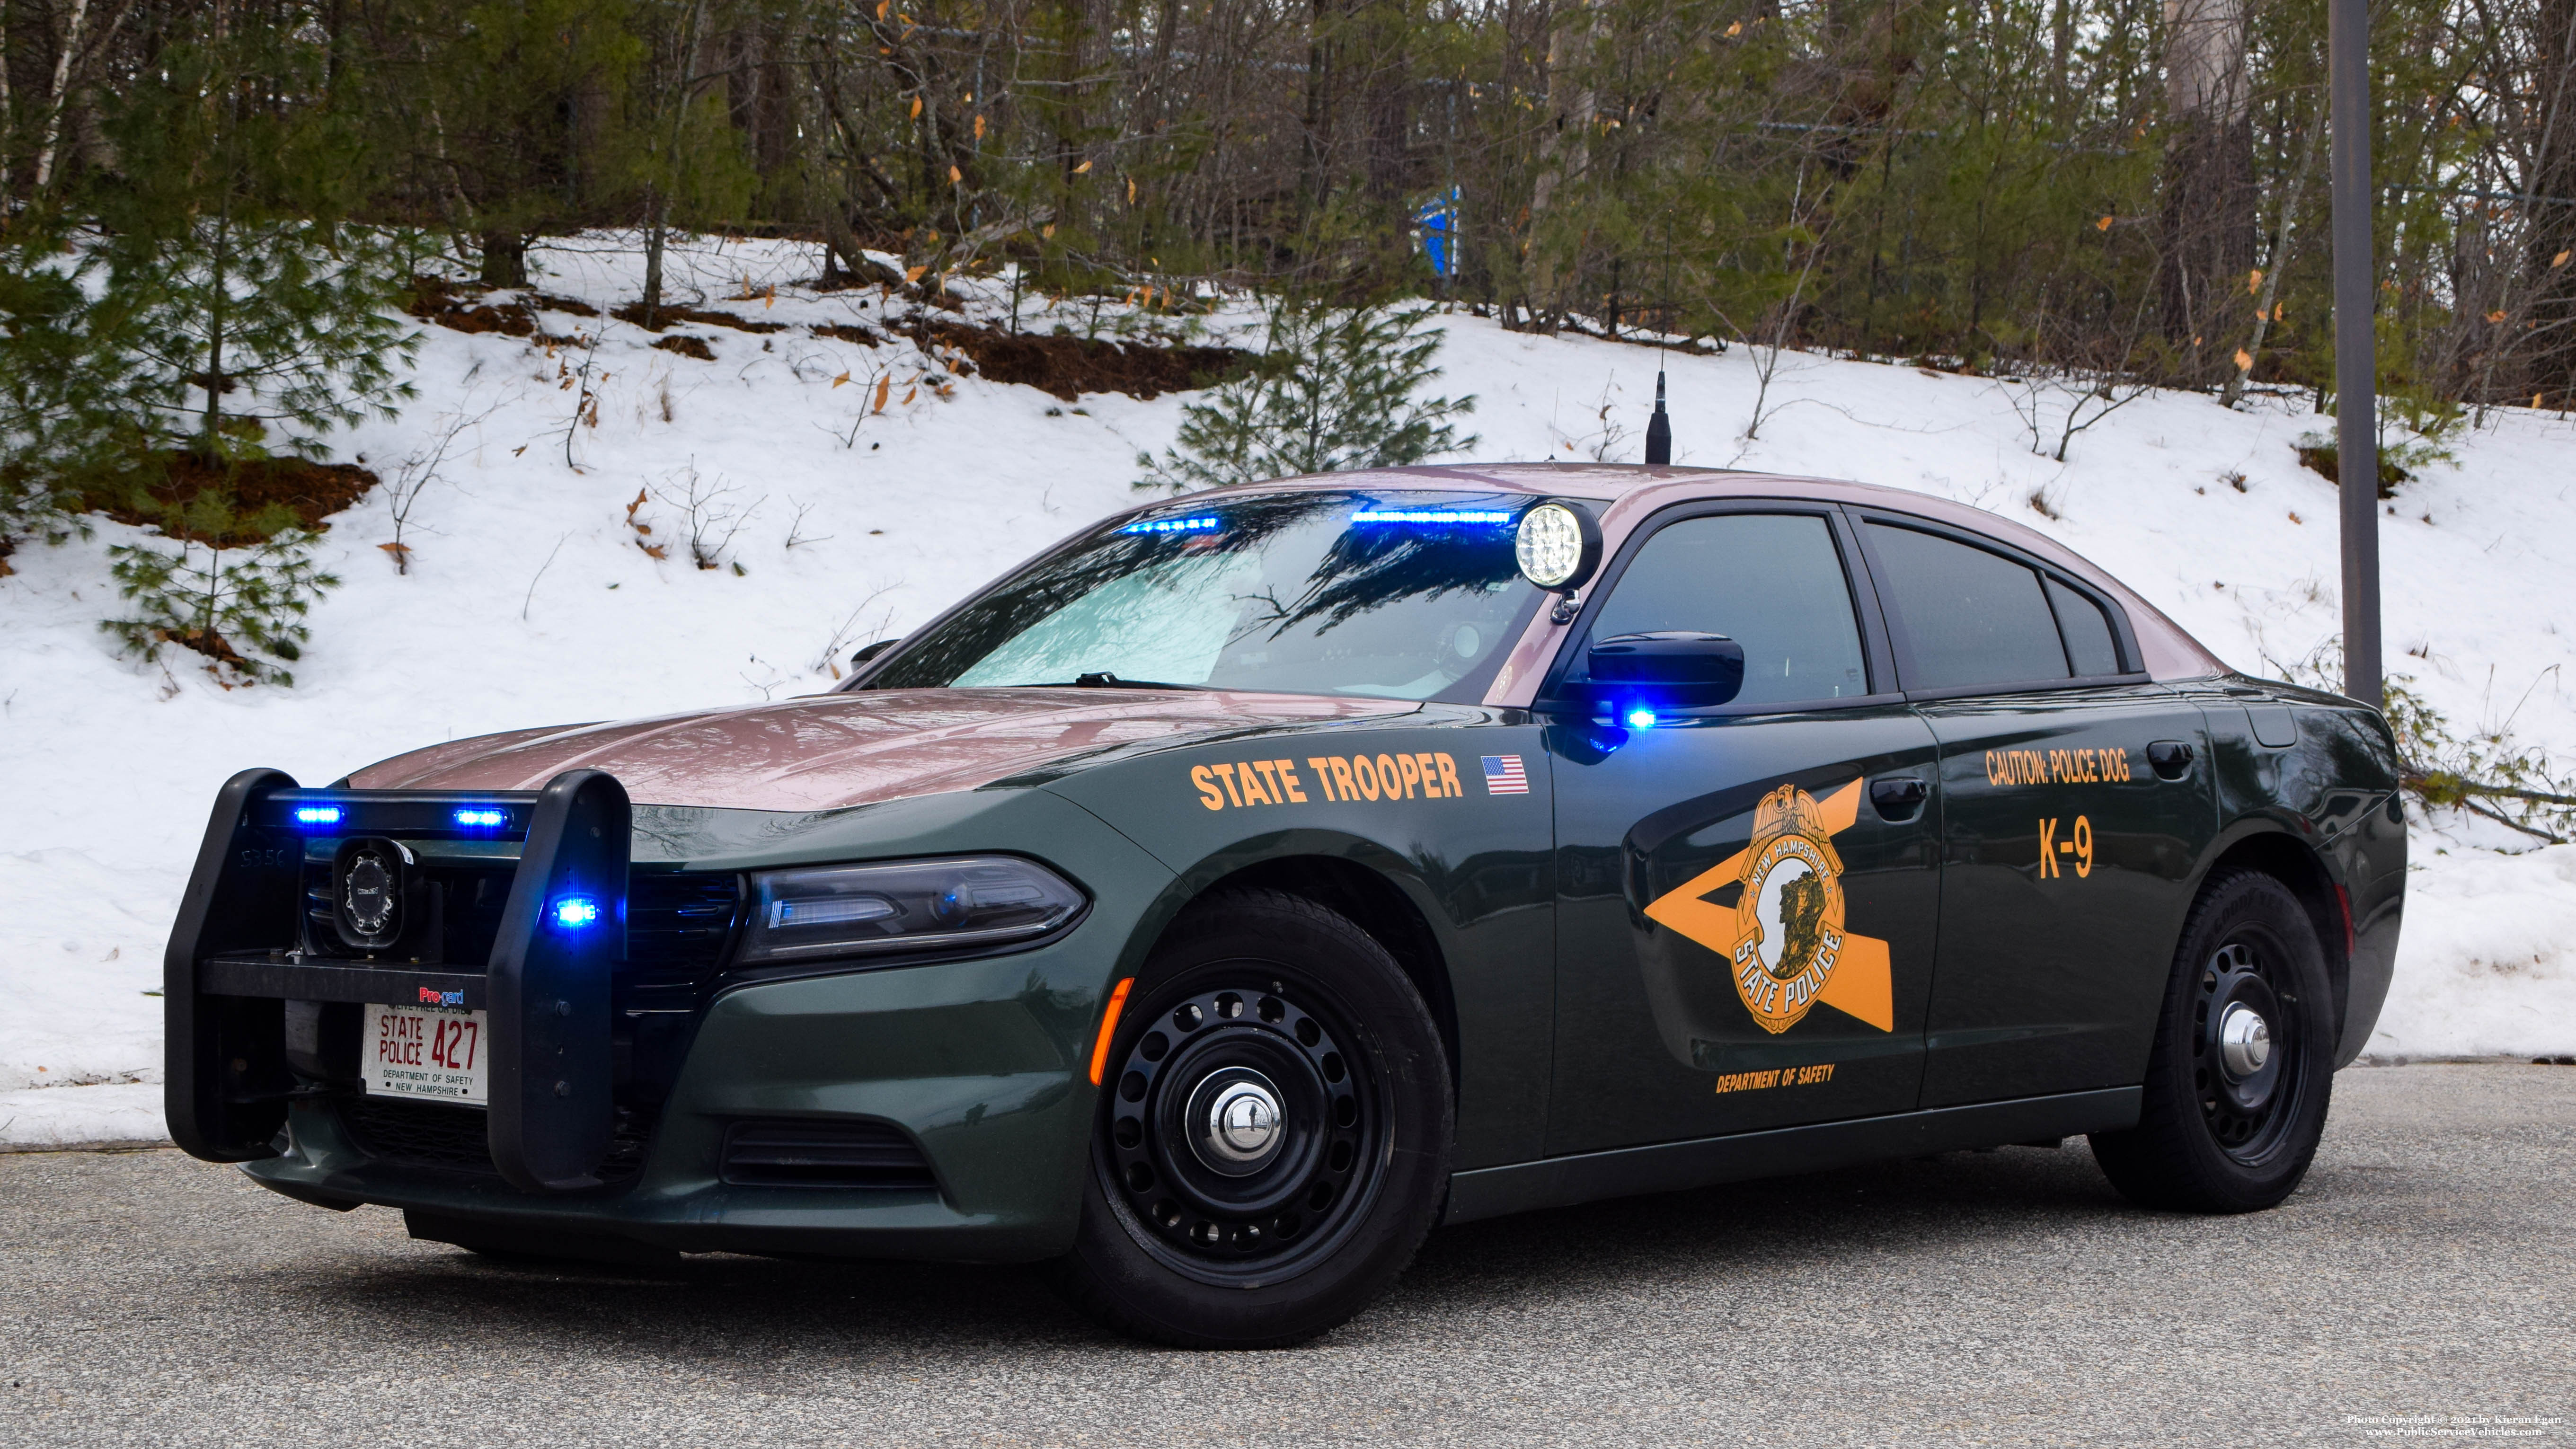 A photo  of New Hampshire State Police
            Cruiser 427, a 2018 Dodge Charger             taken by Kieran Egan